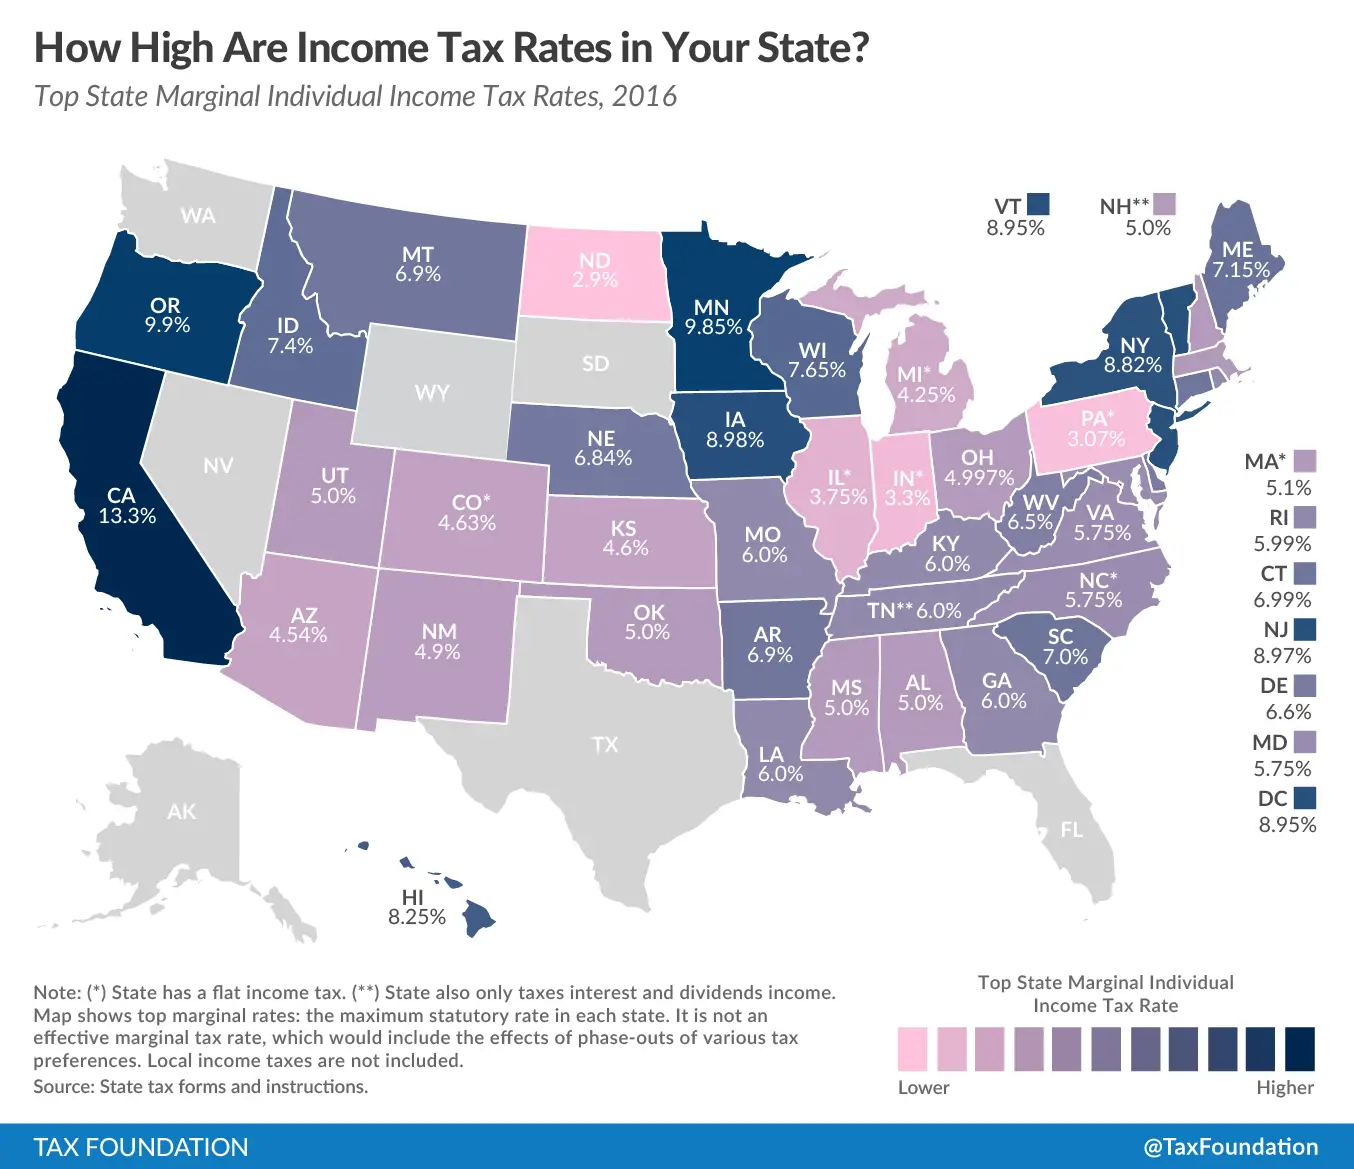 How High are Income Tax Rates in Your State?